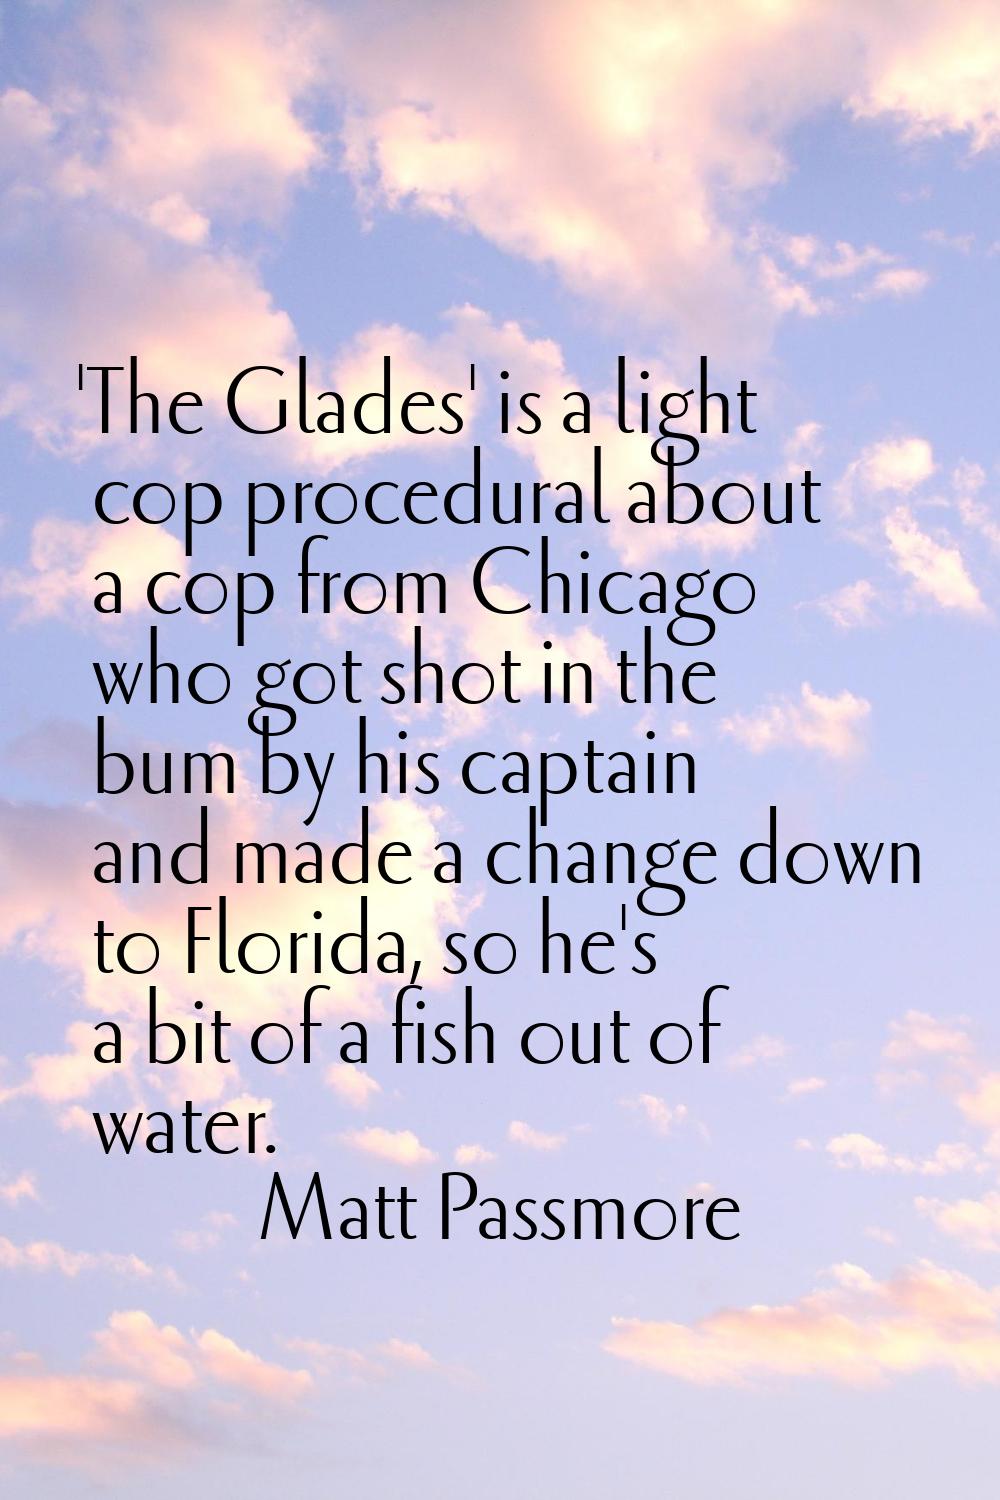 'The Glades' is a light cop procedural about a cop from Chicago who got shot in the bum by his capt